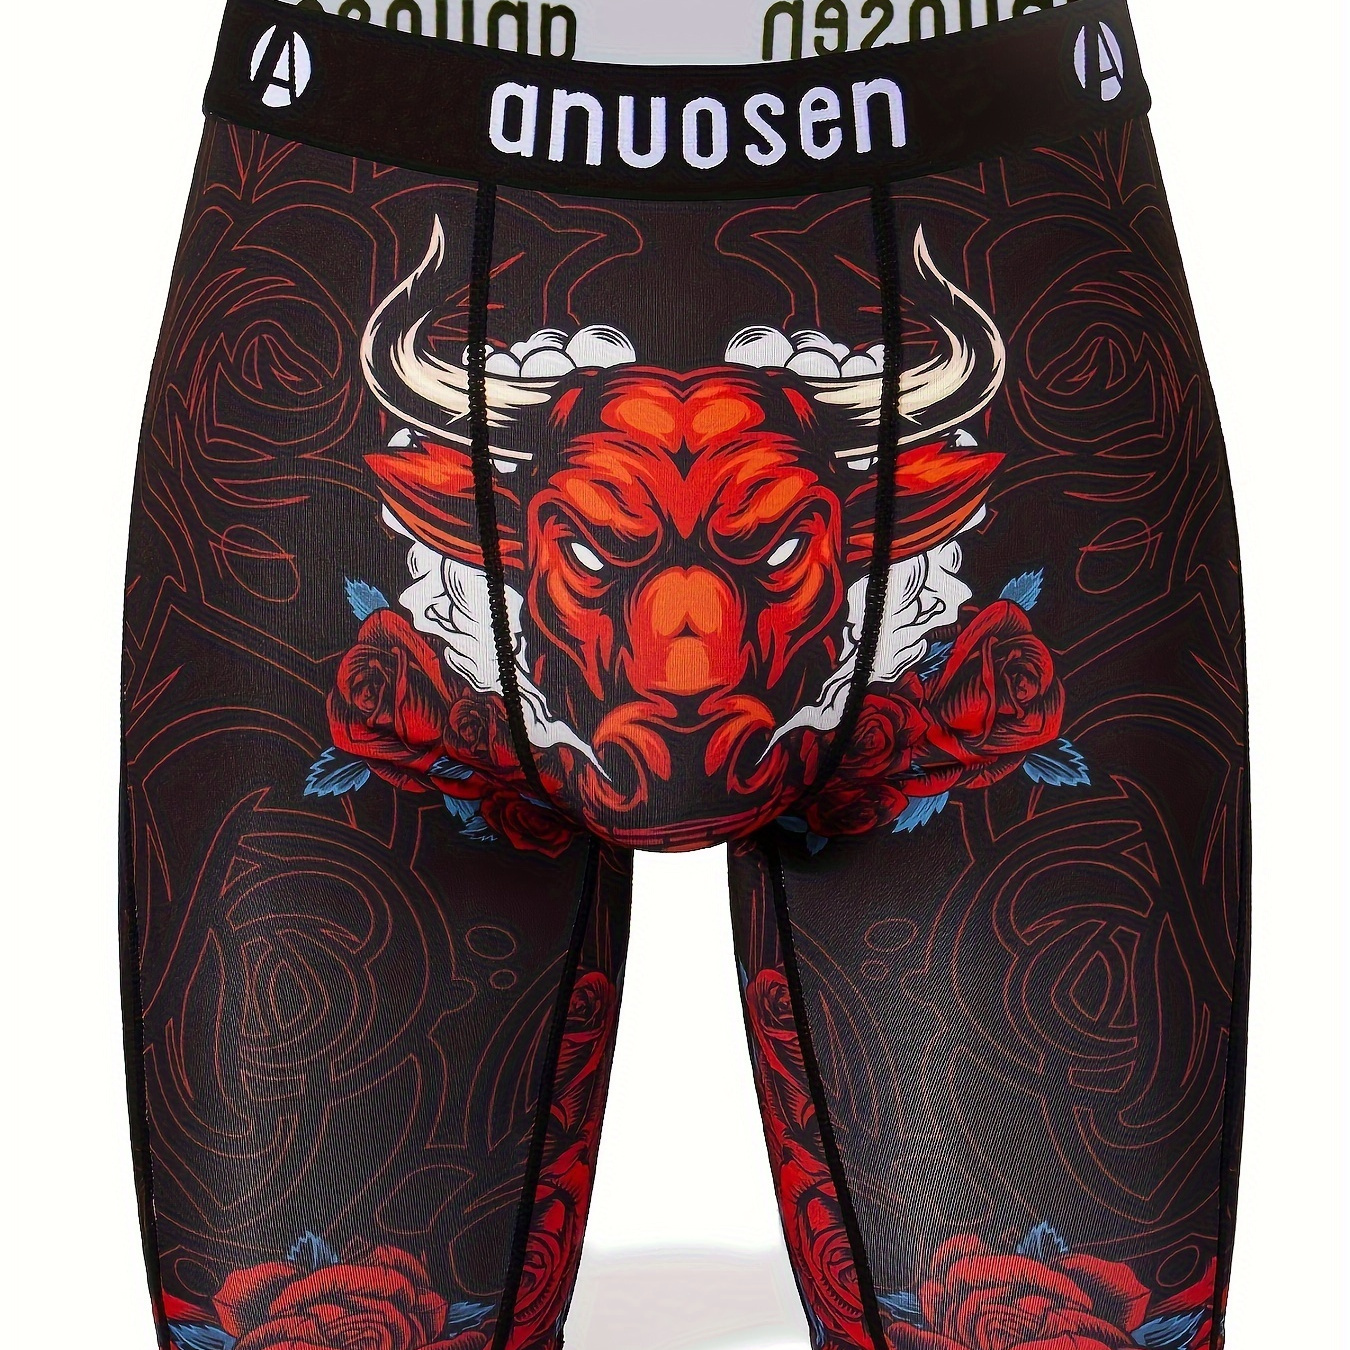 

Chinese Style Men's Rose Bull Head Print Fashion Sports Long Boxer Briefs Shorts, Moisture Wicking Breathable Comfy Anti-wear Quick Drying Boxer Trunks, Men's Novelty Graphic Underwear